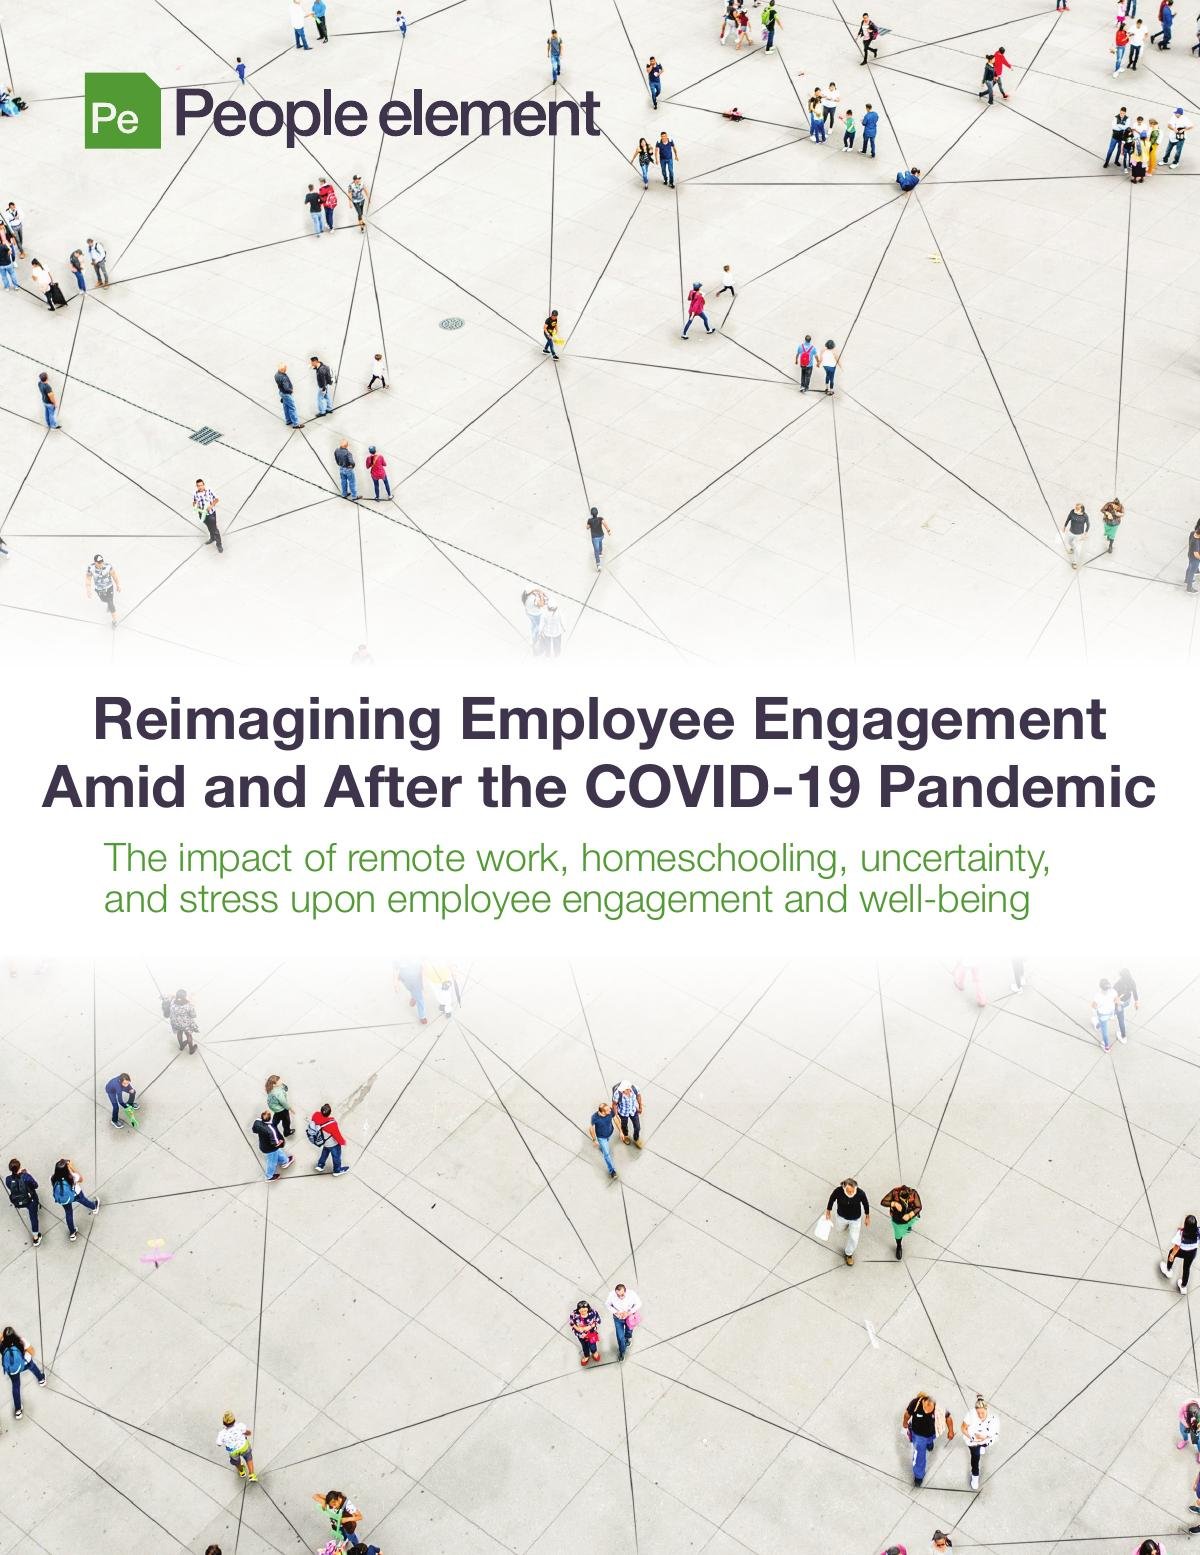 Reimagining Employee Engagement Amid and After the COVID-19 Pandemic